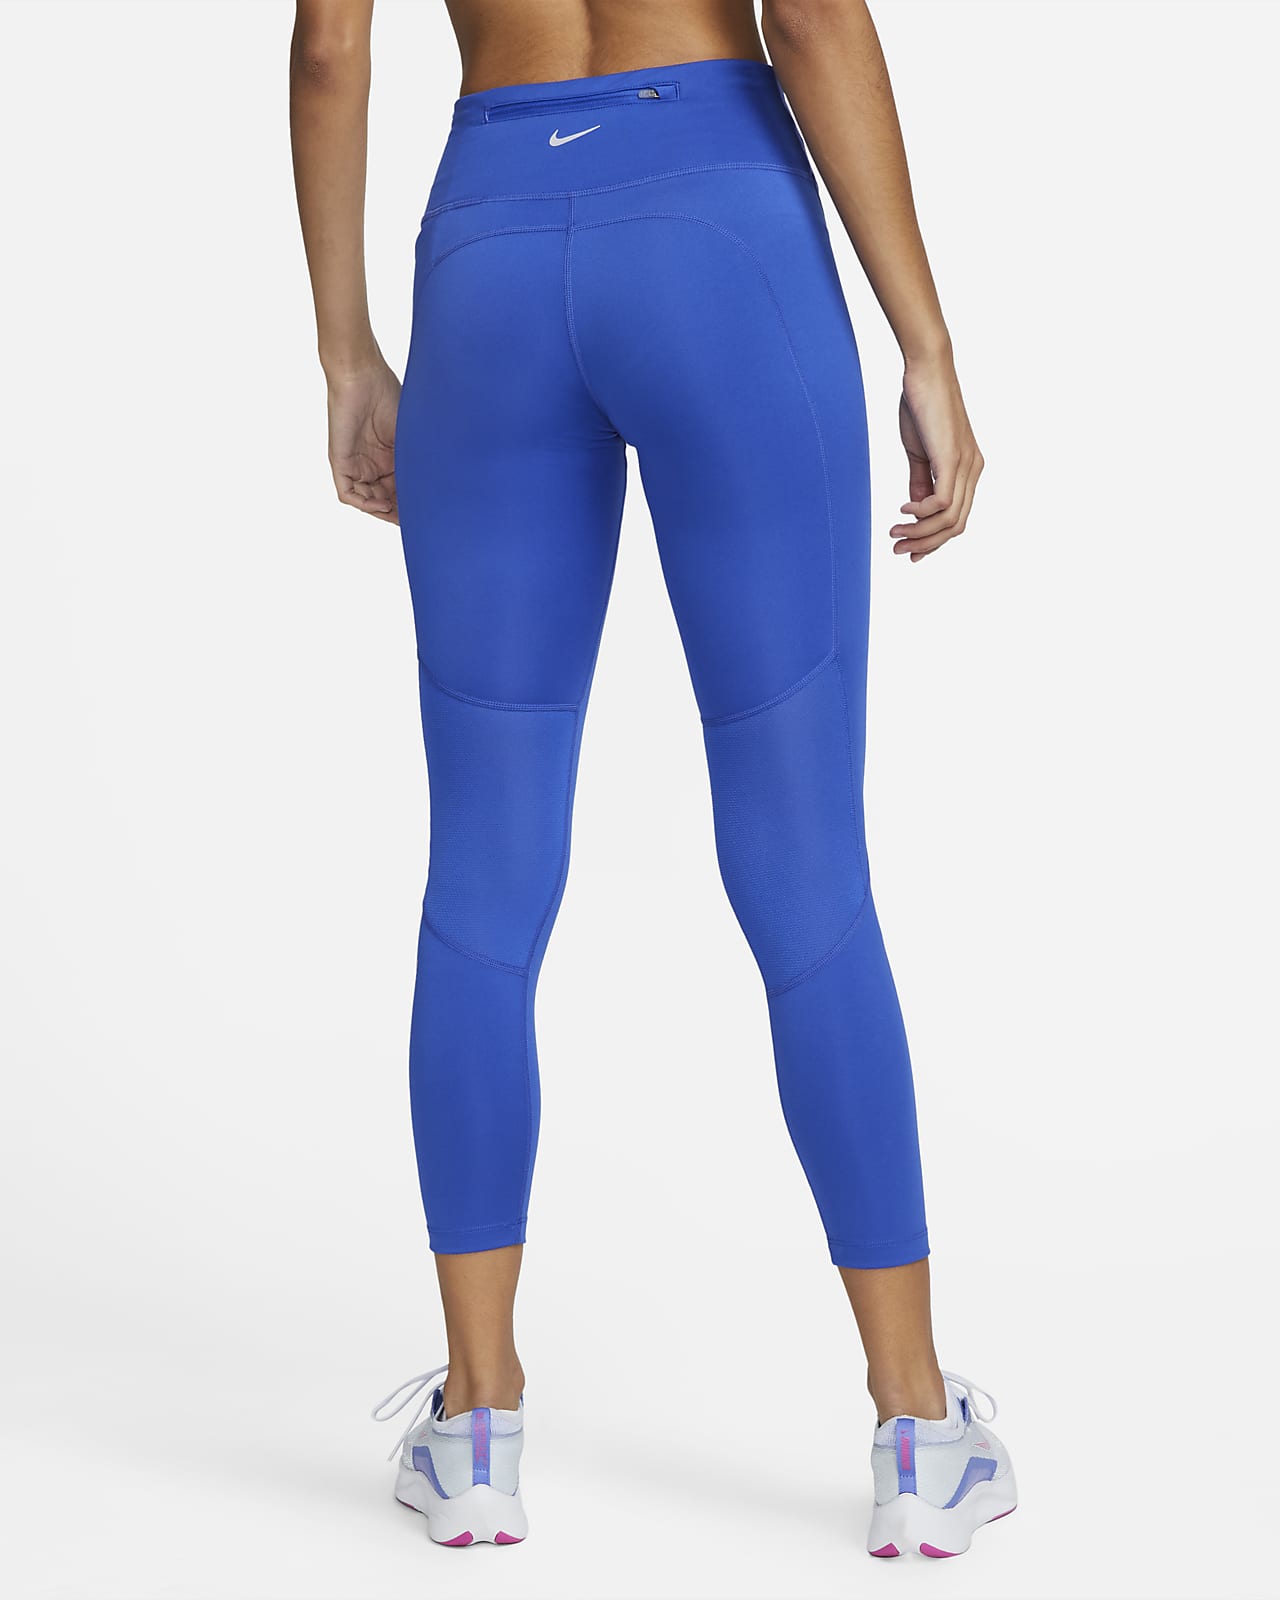 Nike Dri-Fit Team USA Blue Speed MidRise 7/8 Running Leggings Women's Small  for sale online